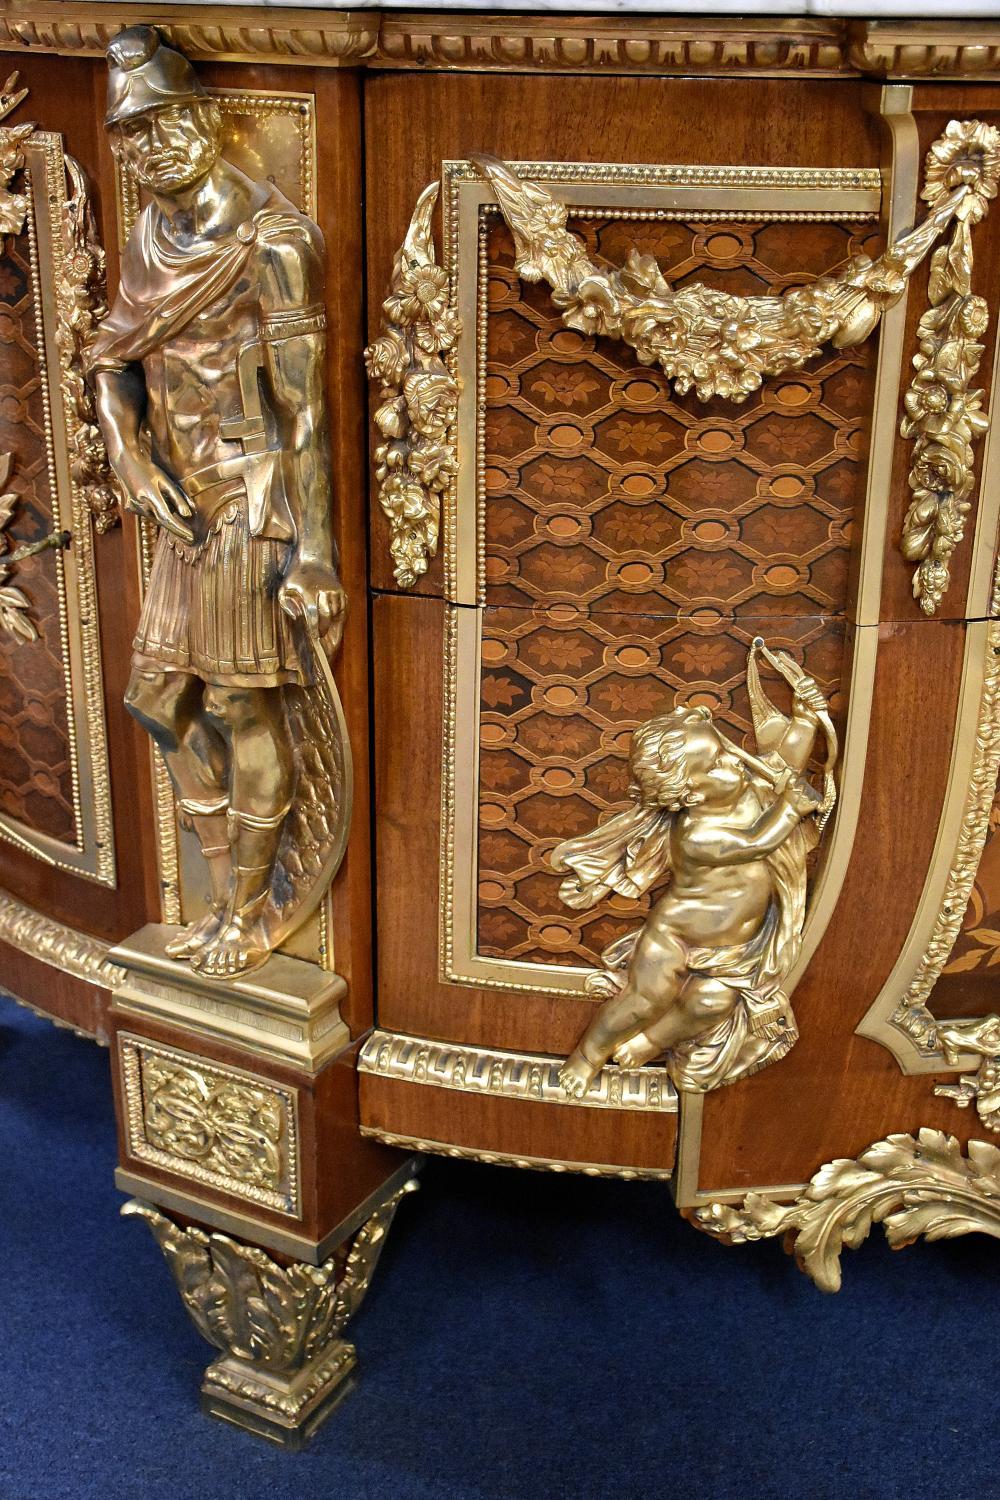 A most outstanding exhibition quality two-door, two drawer, commode having the finest detailed ormolu depicting cherubs, cornucopia, classical maidens and King Louis sunburst mount. The kingwood commode having the finest floral marquetry inlay and